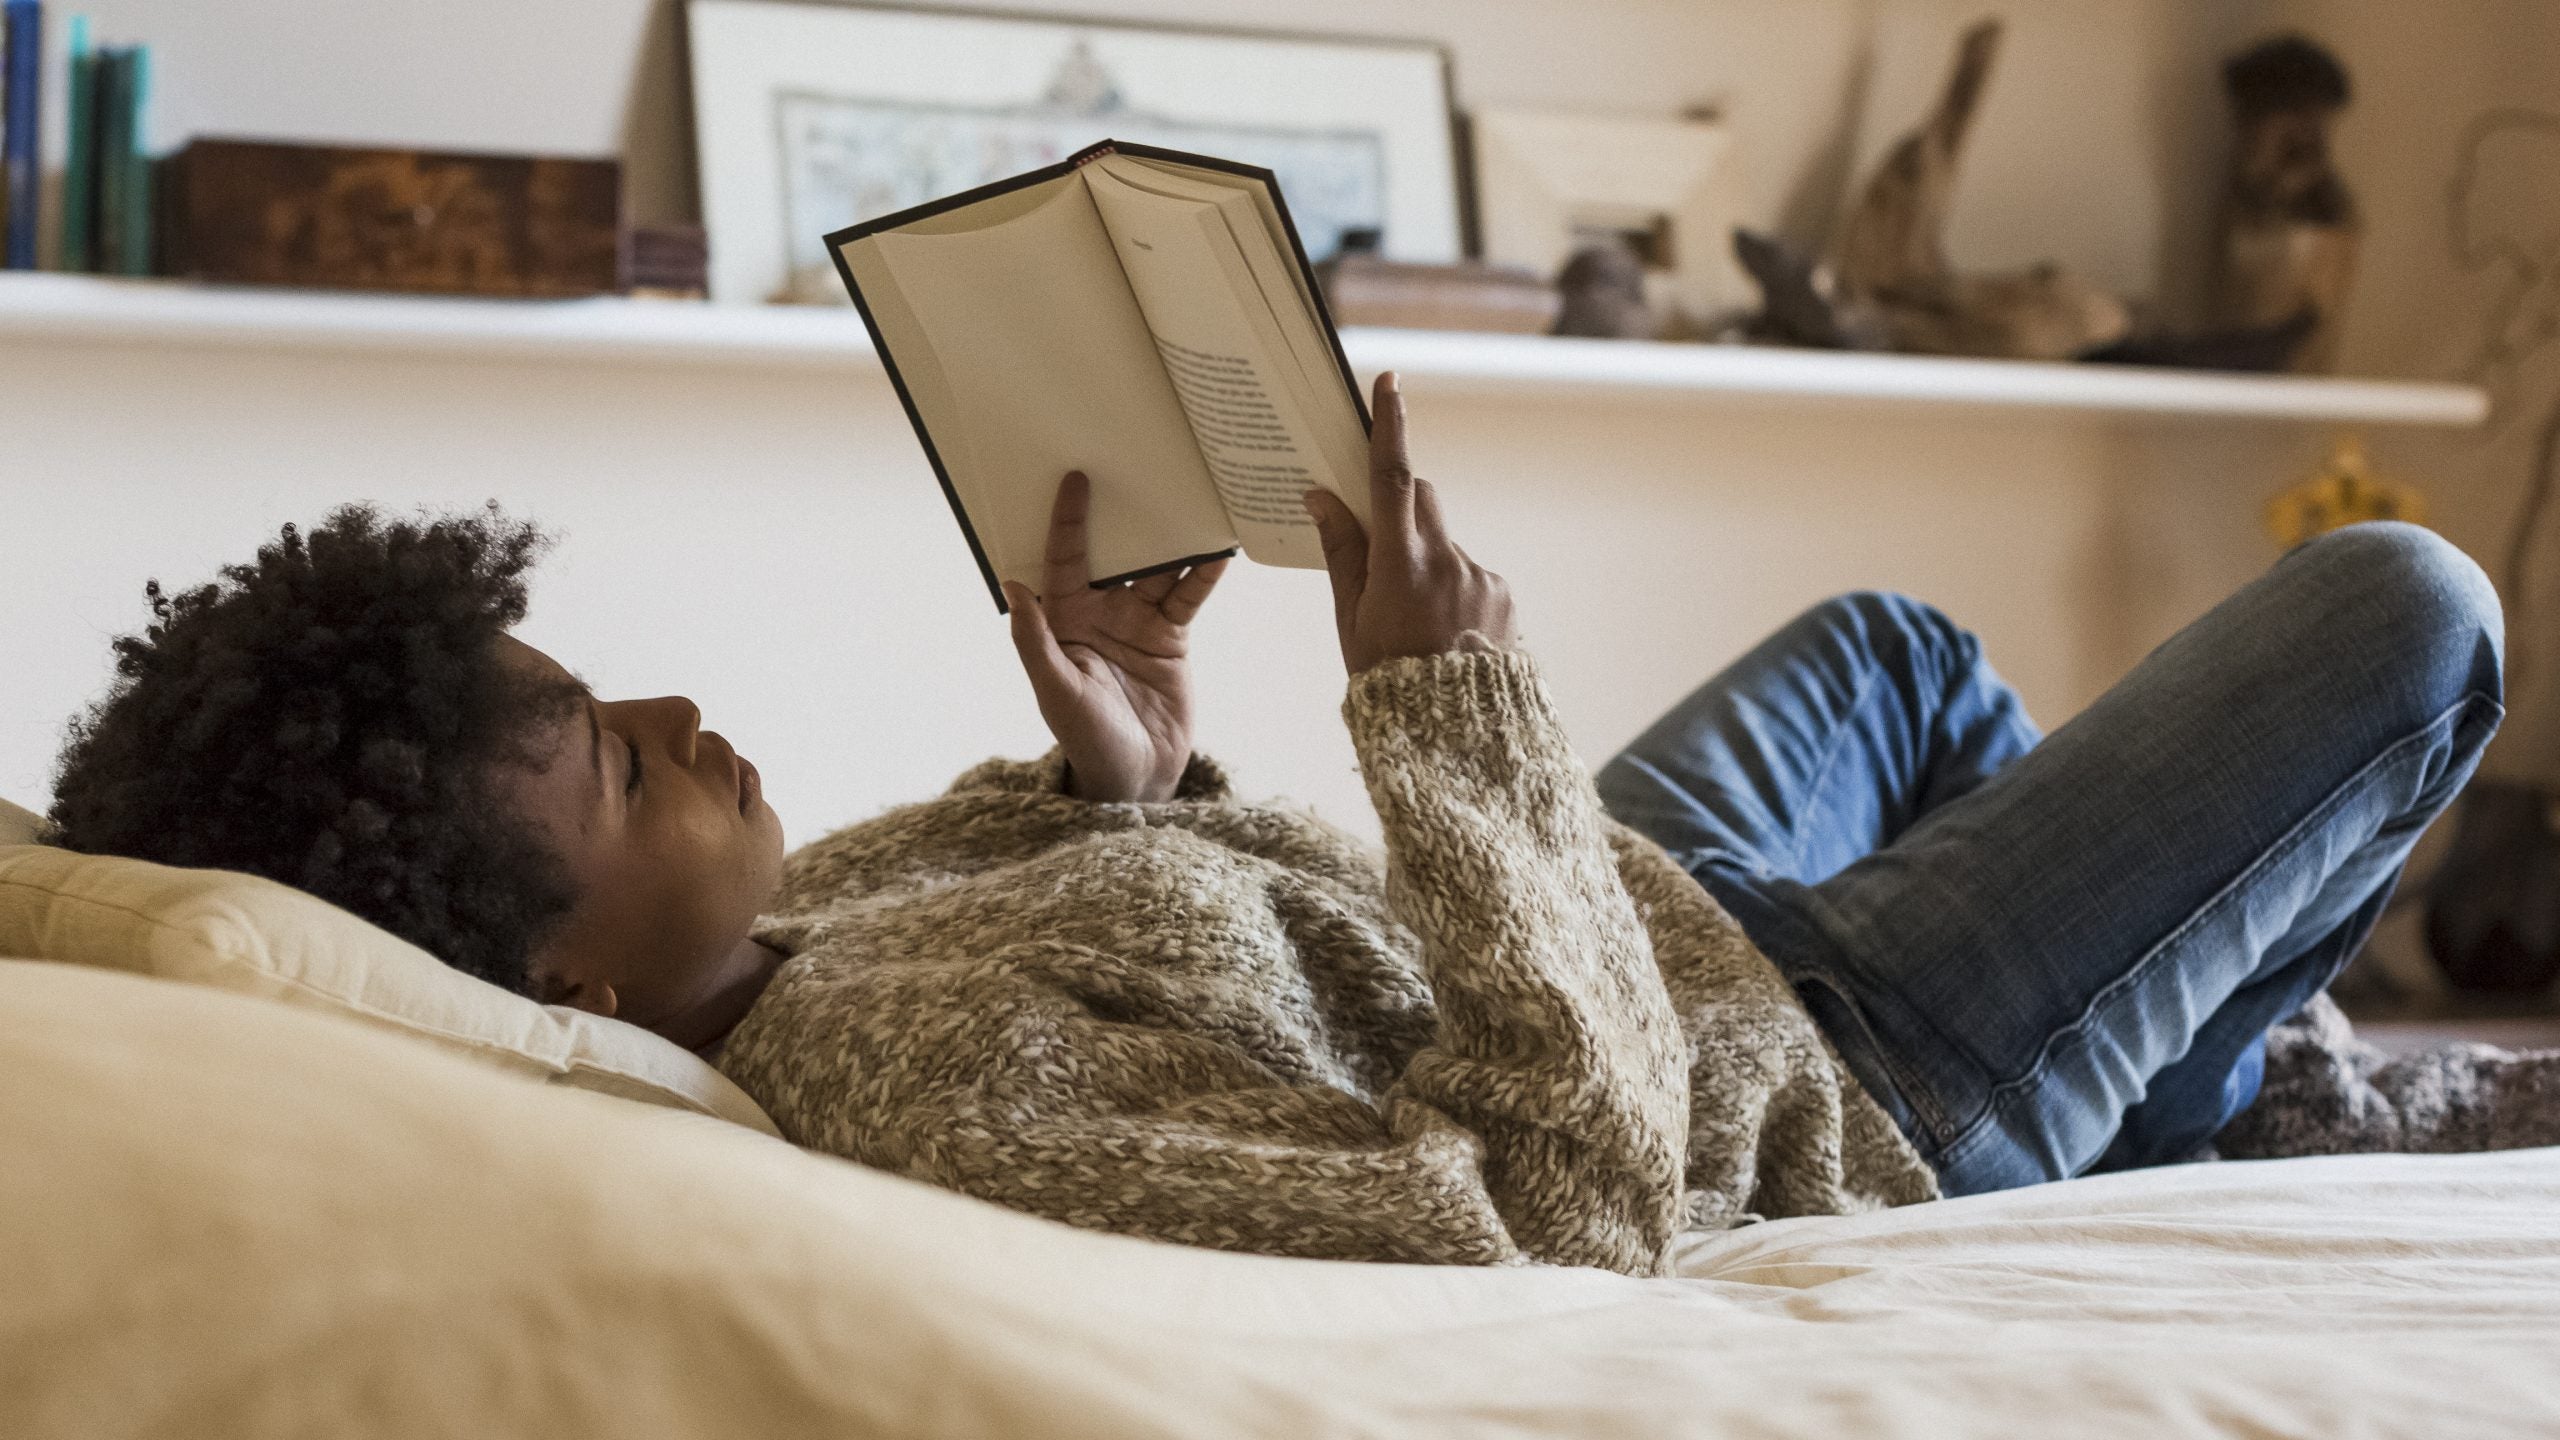 18 Books To Read At Home Over Your Holiday Break